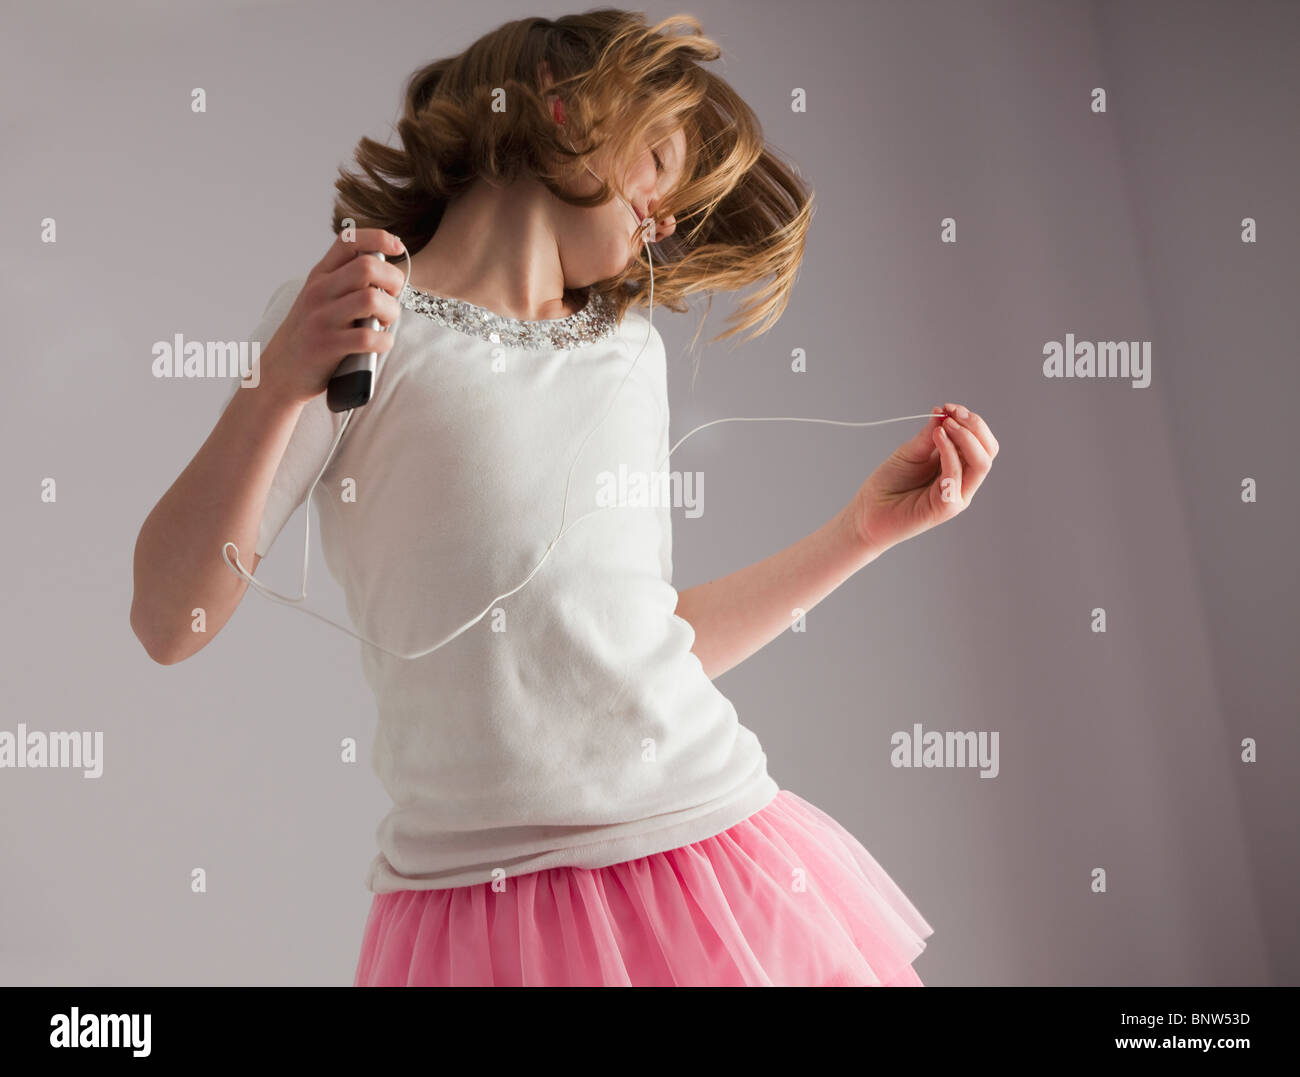 Young girl dancing on her bed Stock Photo